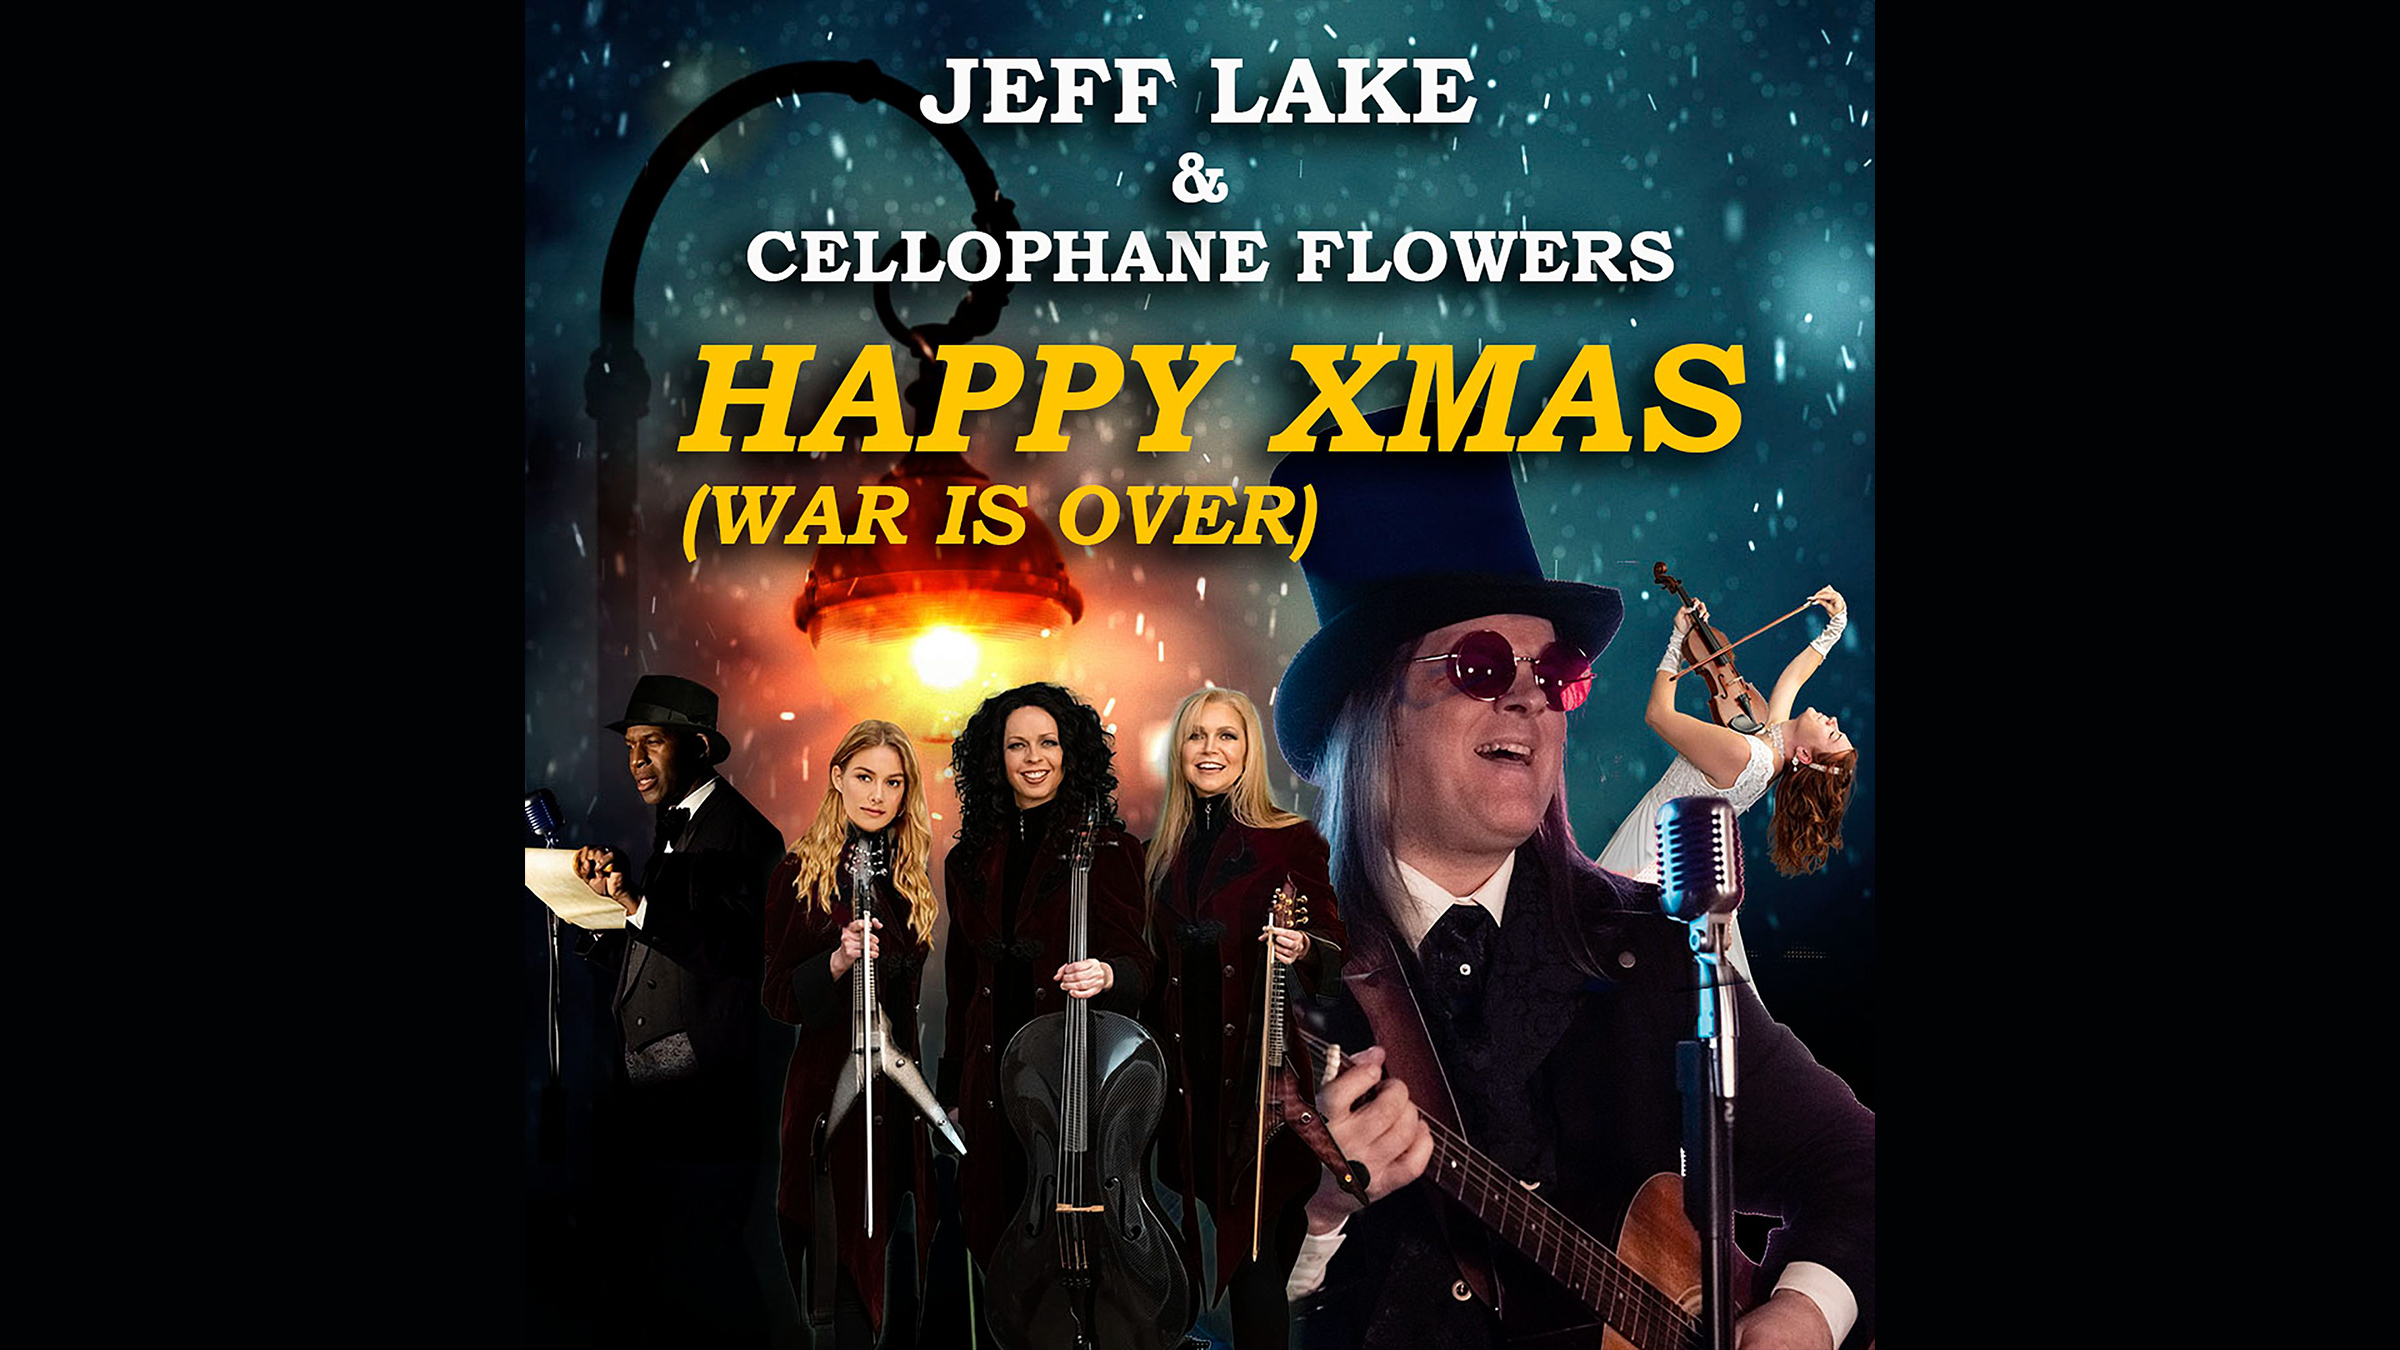 The Christmas Chronicles: A Year in the Life of Jeff Lake